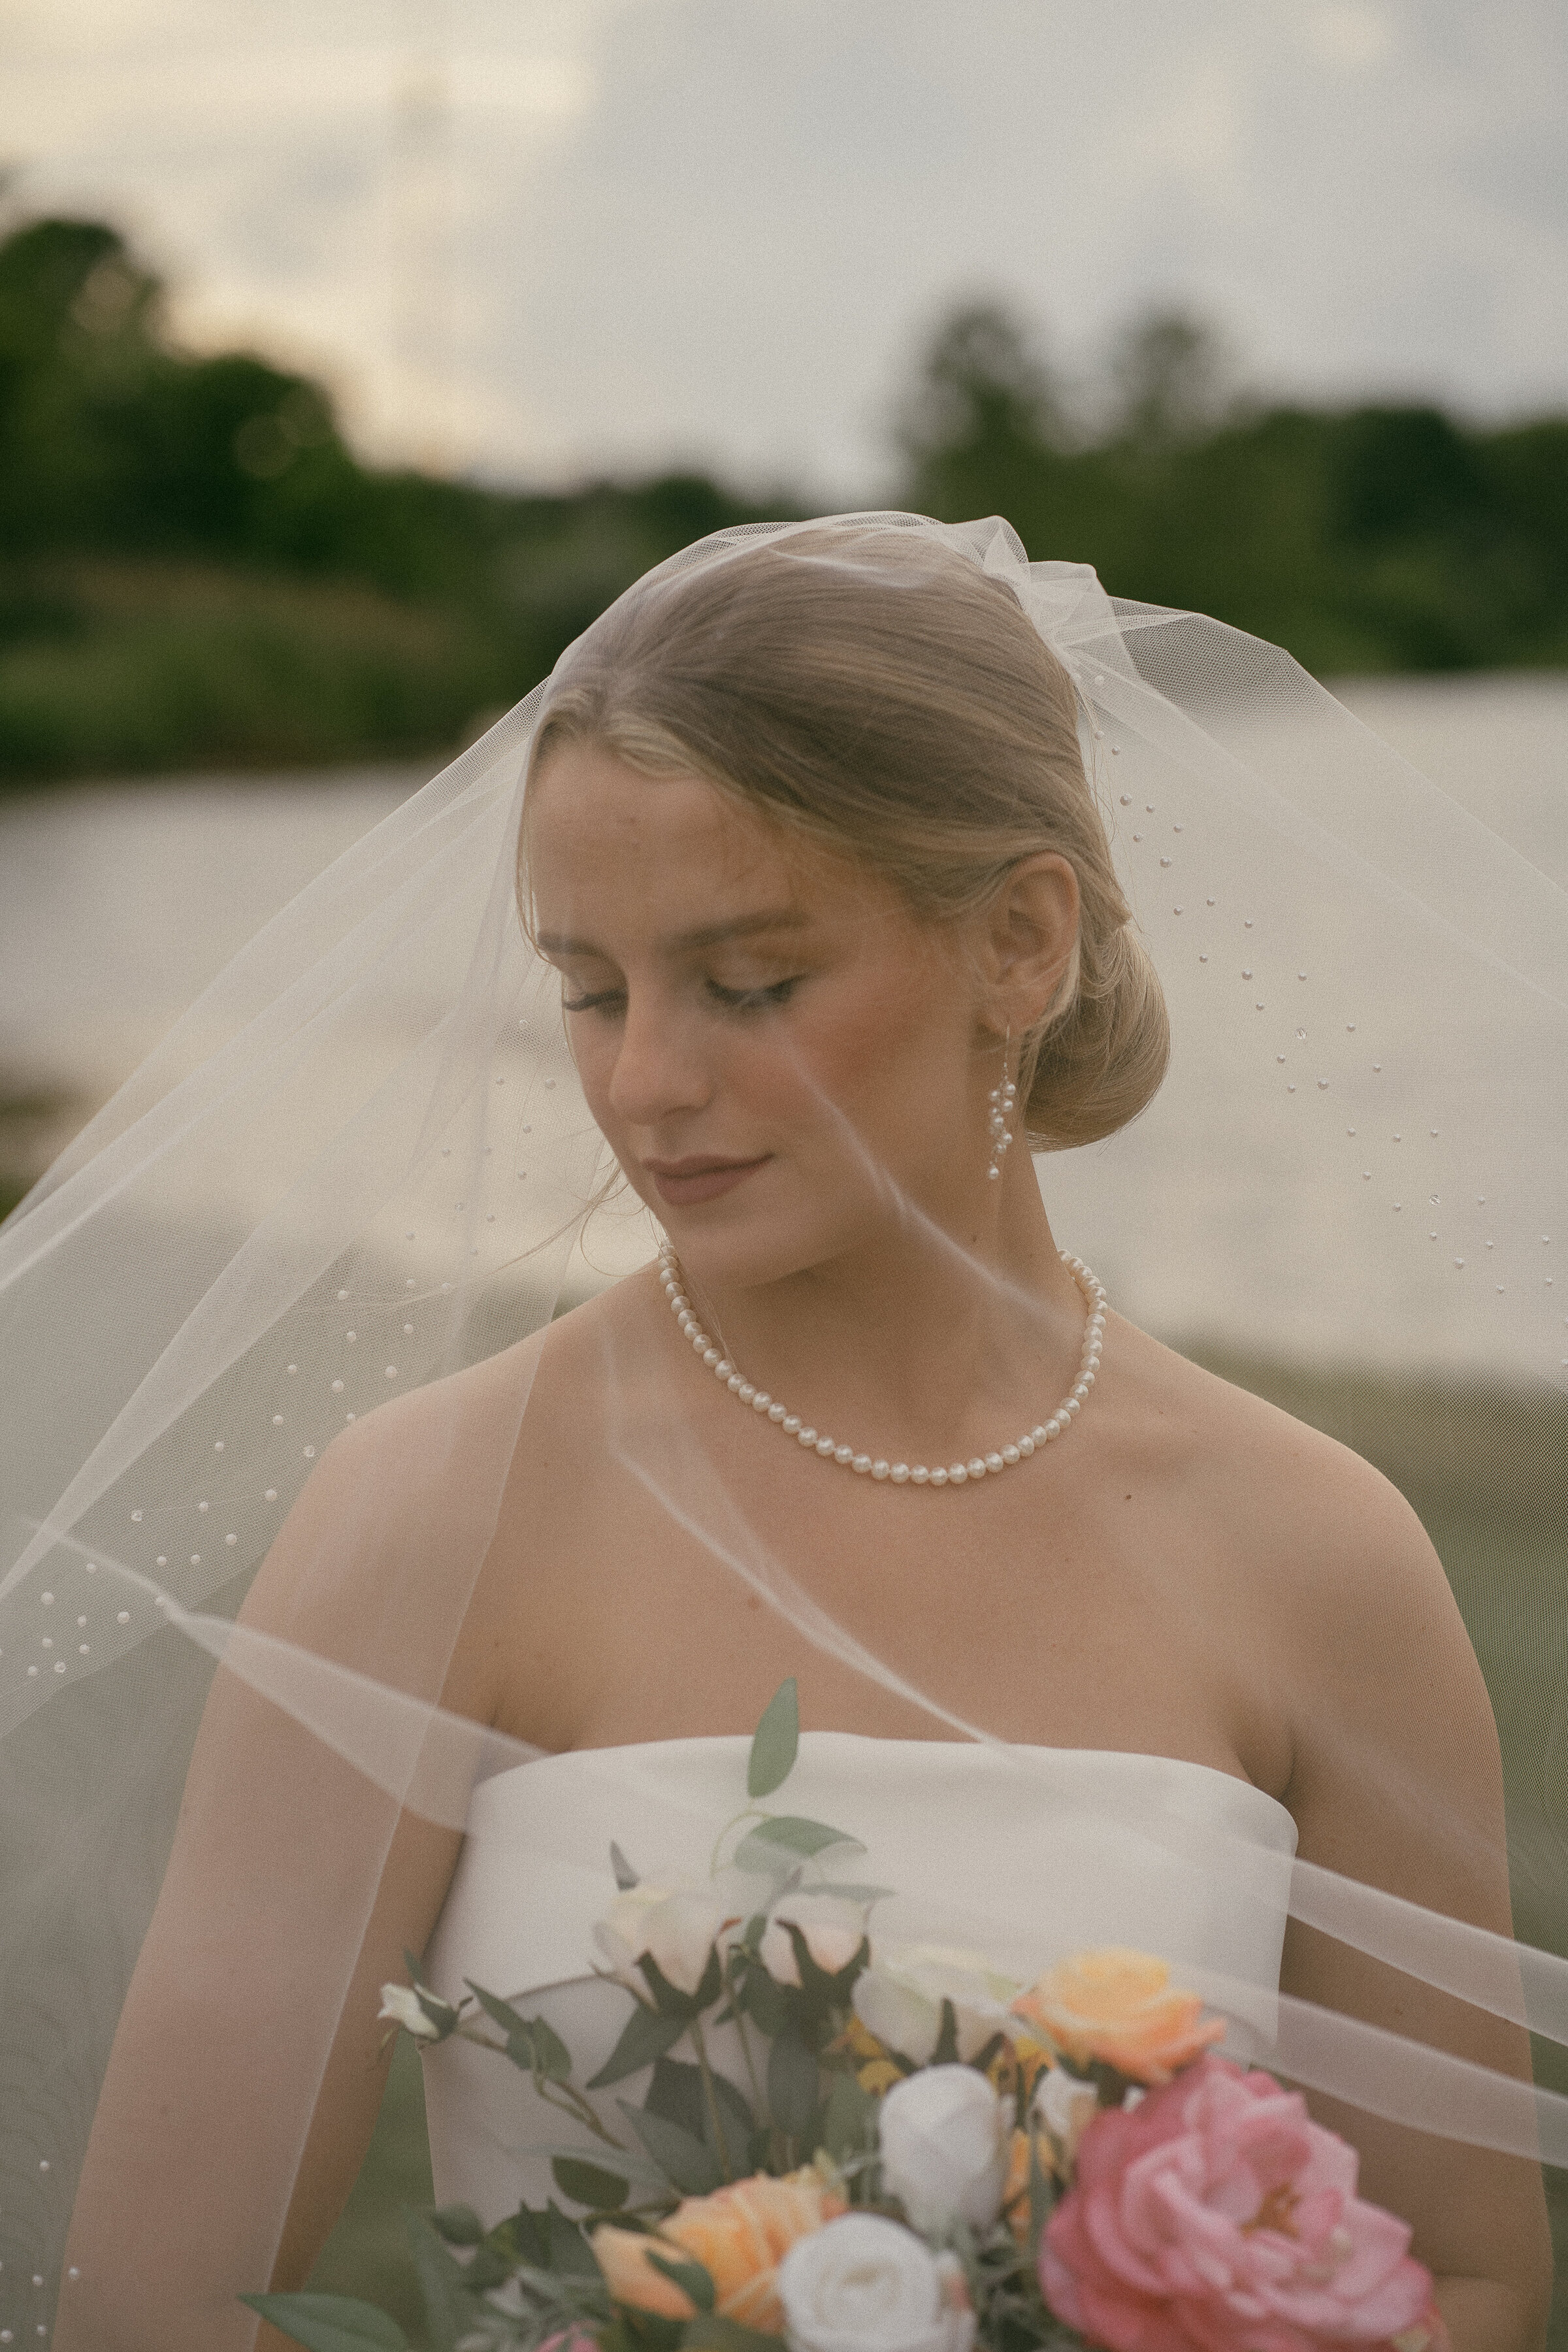 Bride in a veil holding a bouquet, looking down thoughtfully.